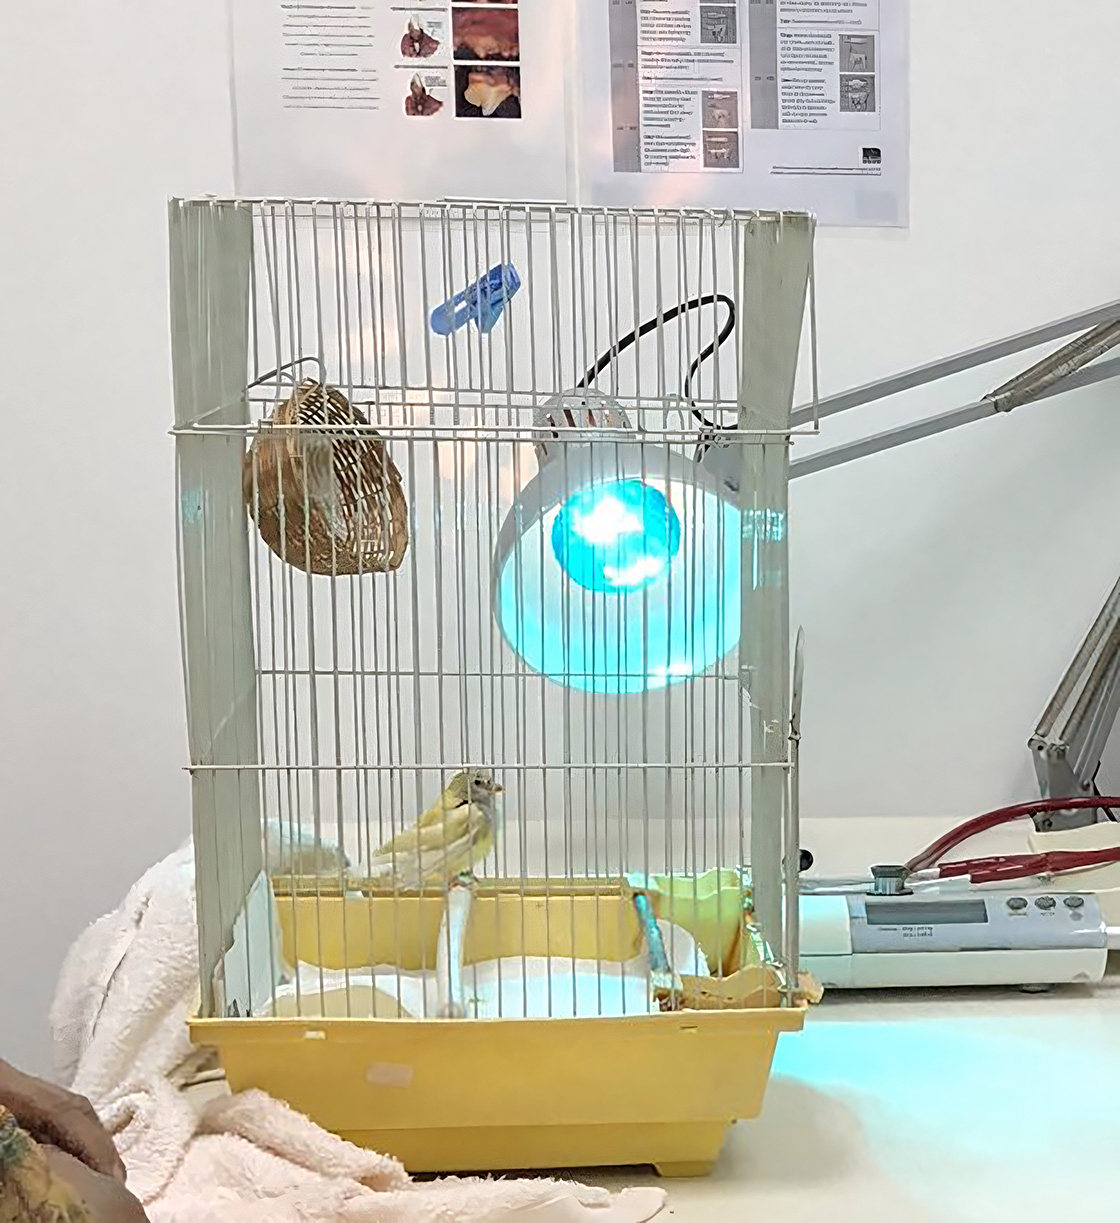 A bird recovery cage featuring a heat lamp, toys, and a yellow base, set up in a clinical environment.